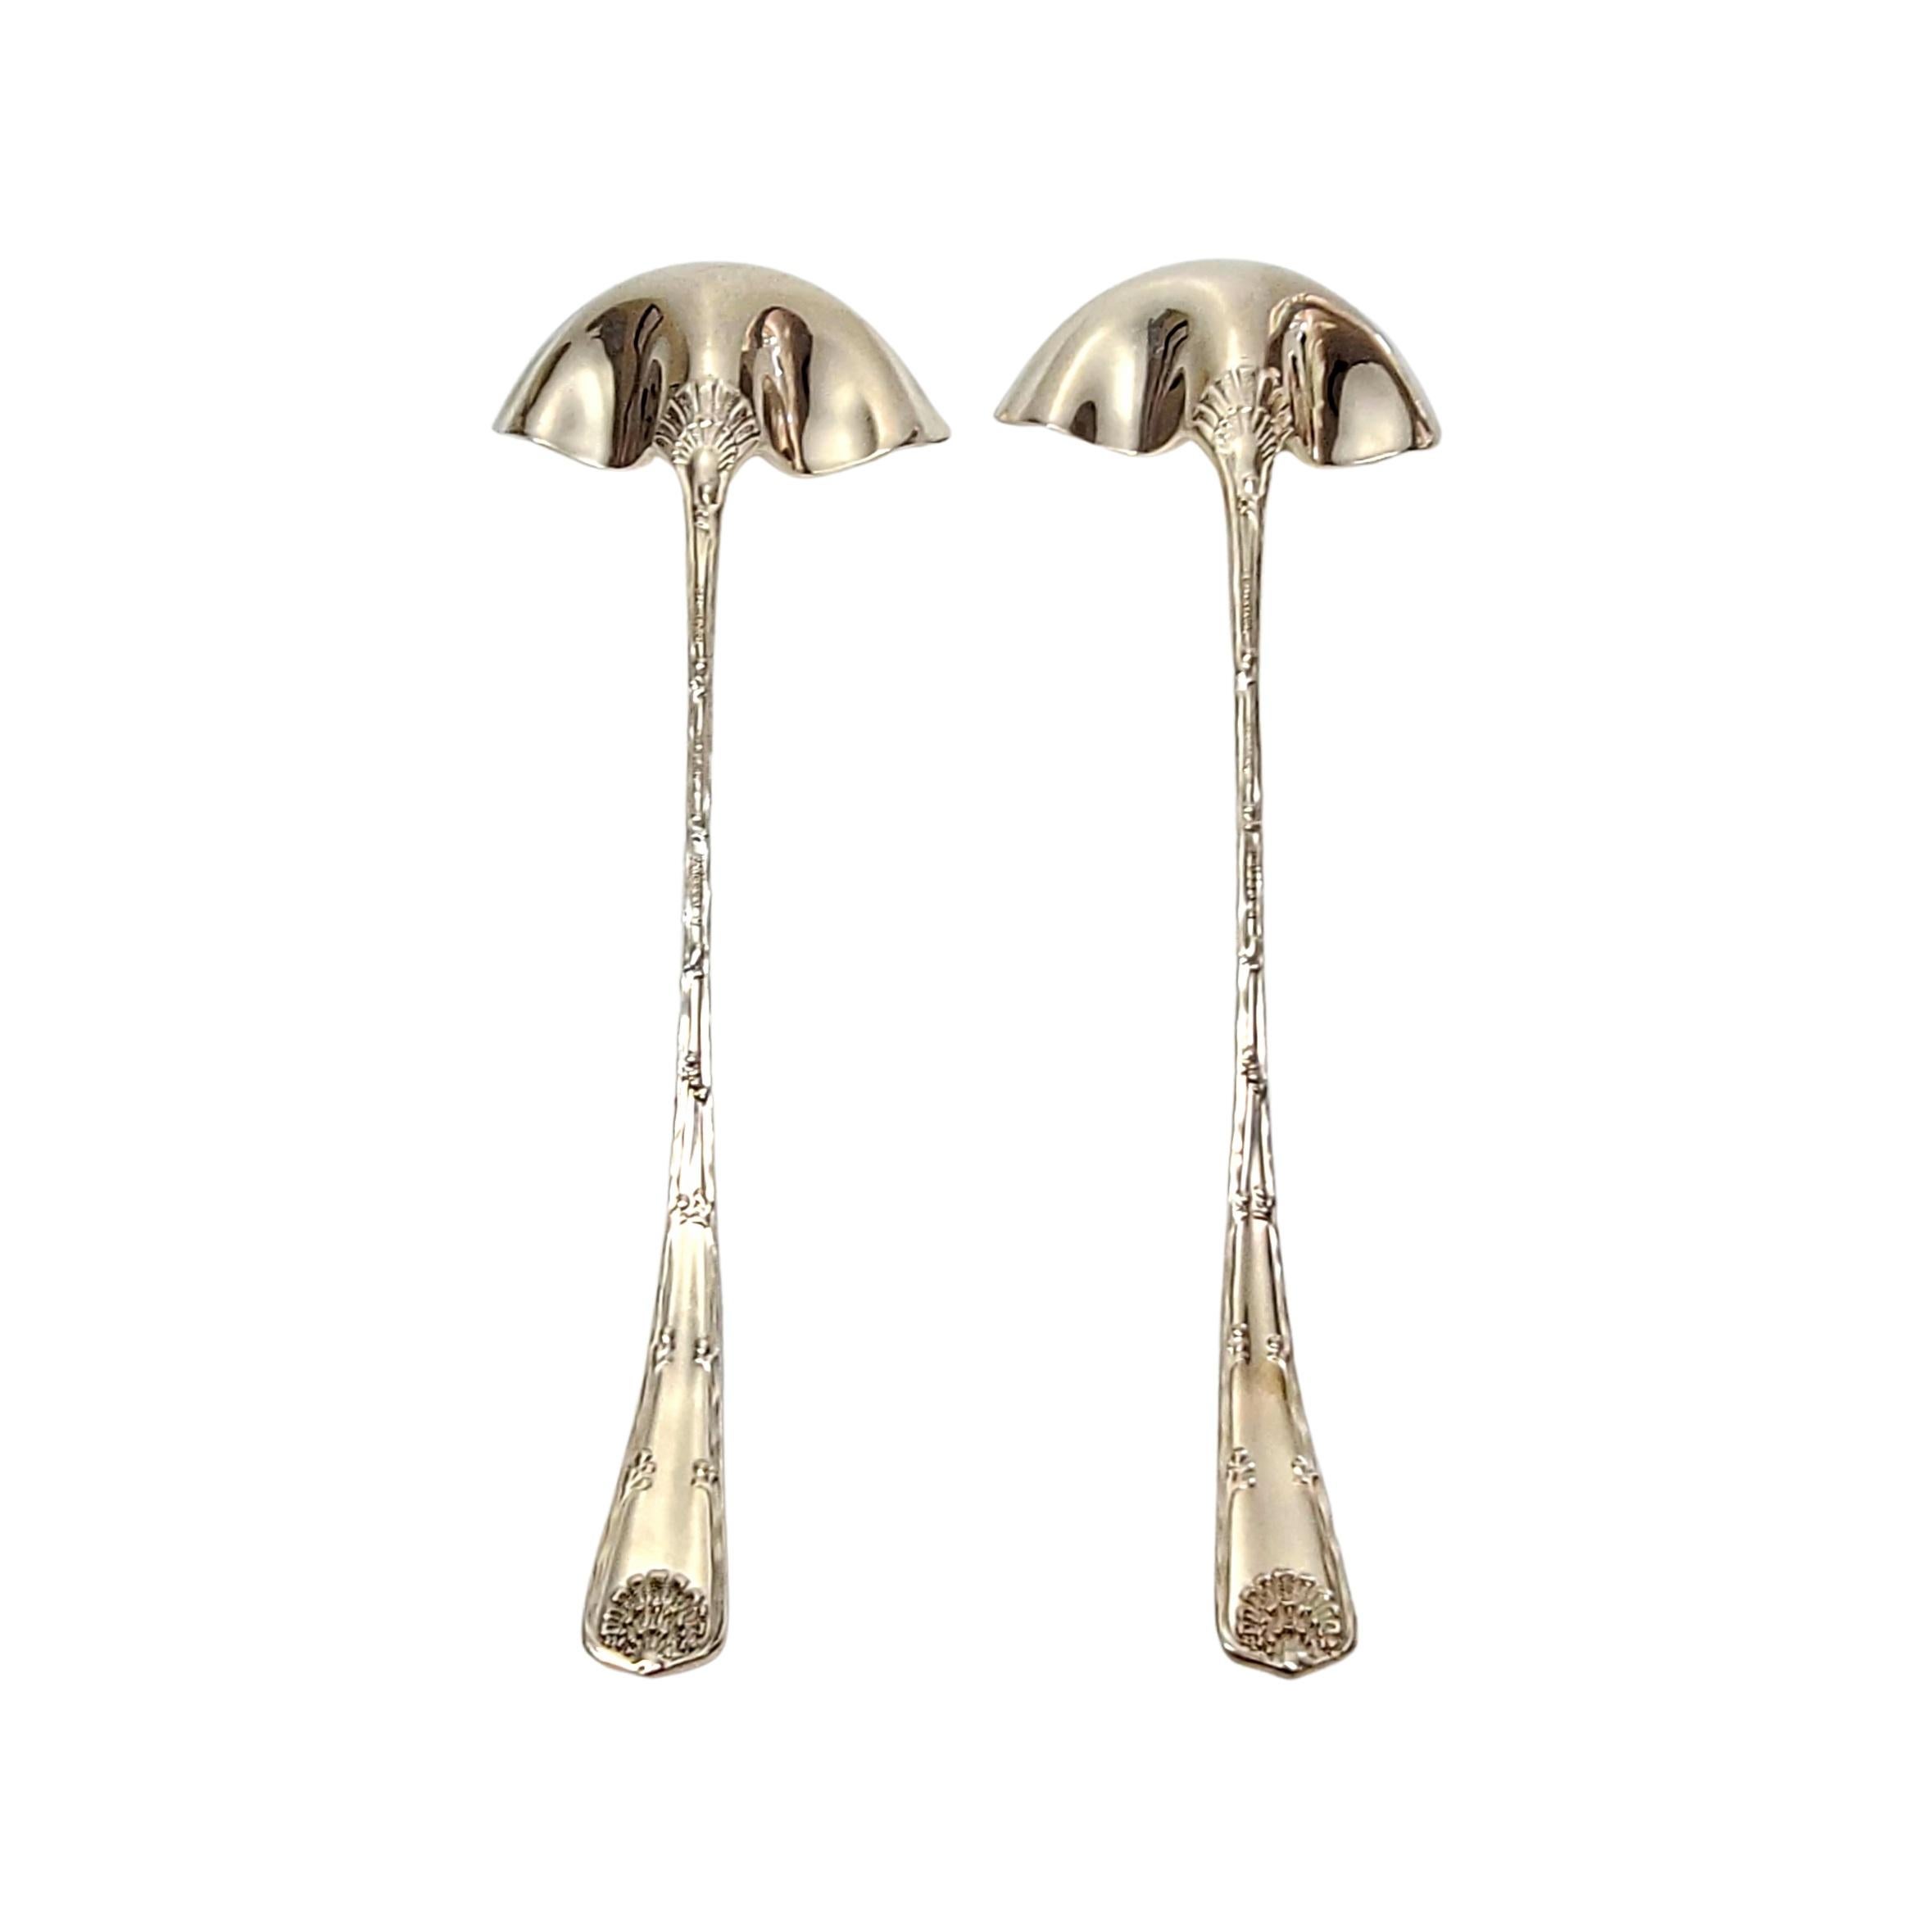 Set of 2 sterling silver cream ladles by Tiffany & Co in the Wave Edge pattern.

No monogram.

The Wave Edge pattern is a marine motif designed by Charles T. Grosjean in 1884. The ladles feature a shell design at the op of each handle. Hallmarks